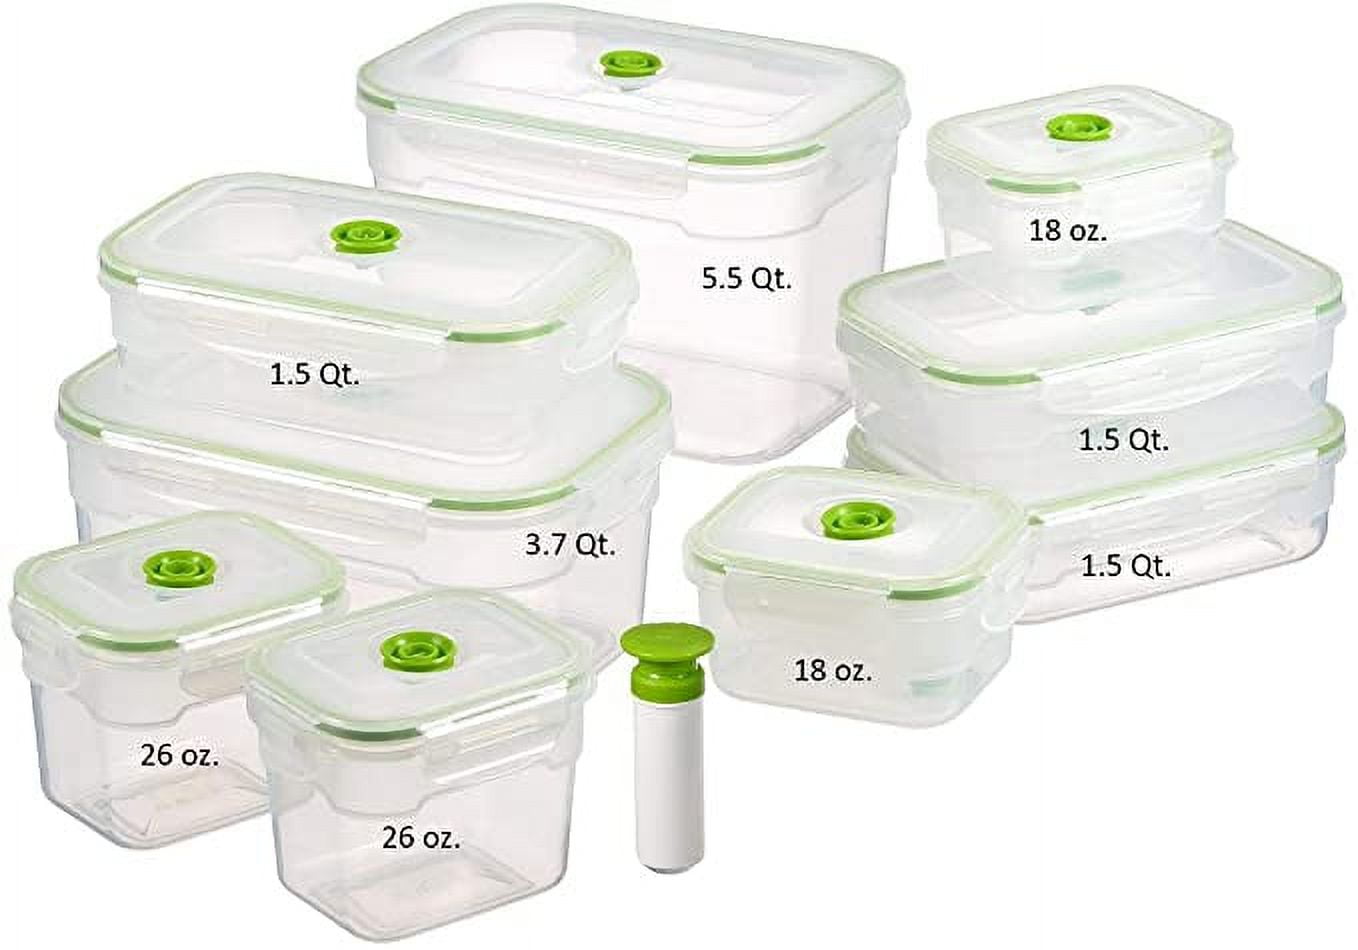 XLarge Paper 4 Compartment Food Containers by Huang Guan